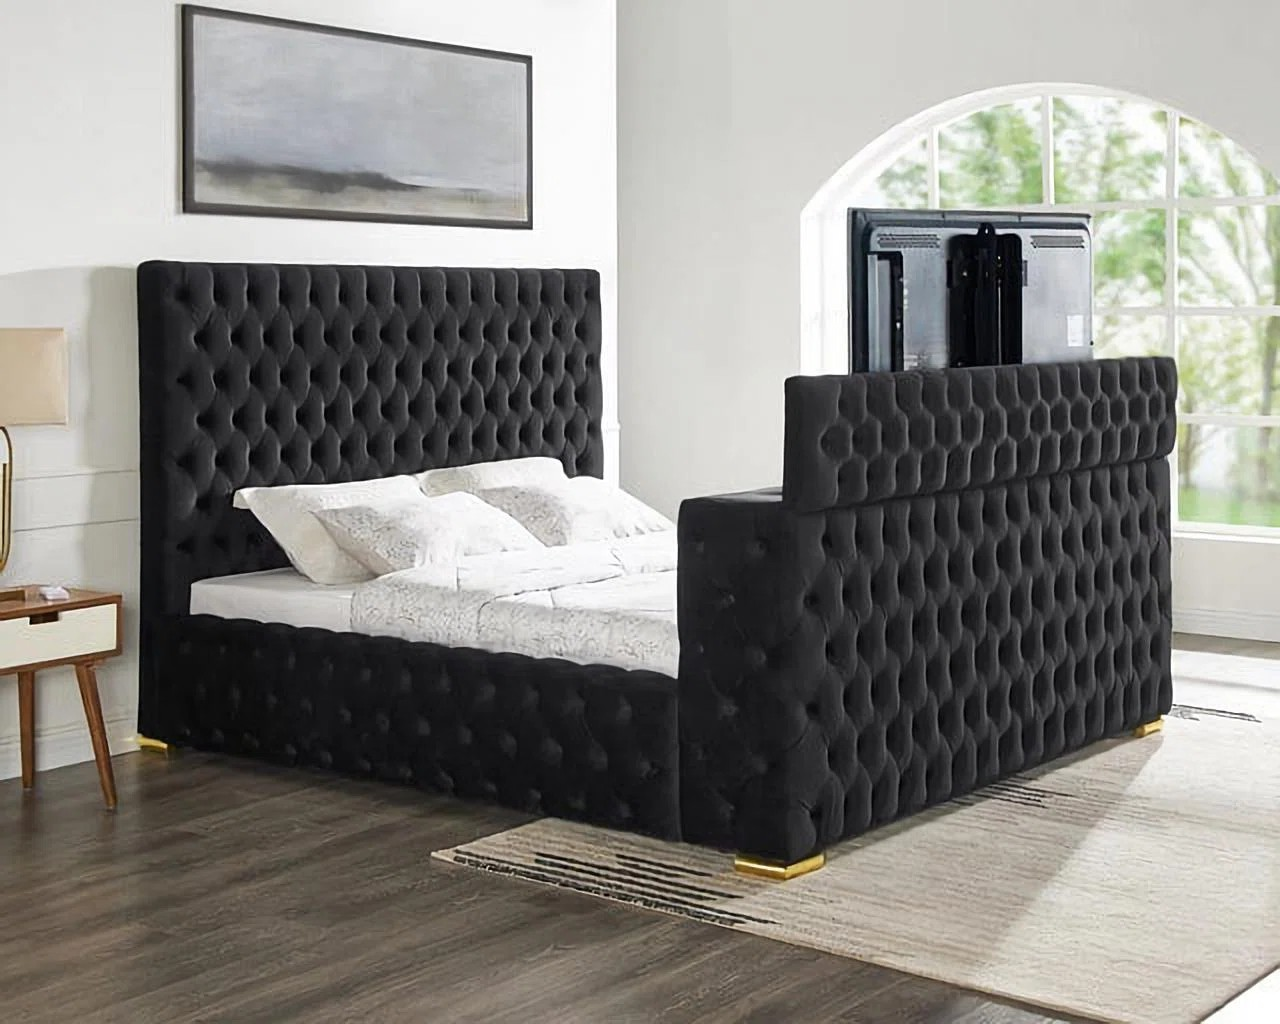 3-Piece Bed with Built-in Fireplace and TV Mount